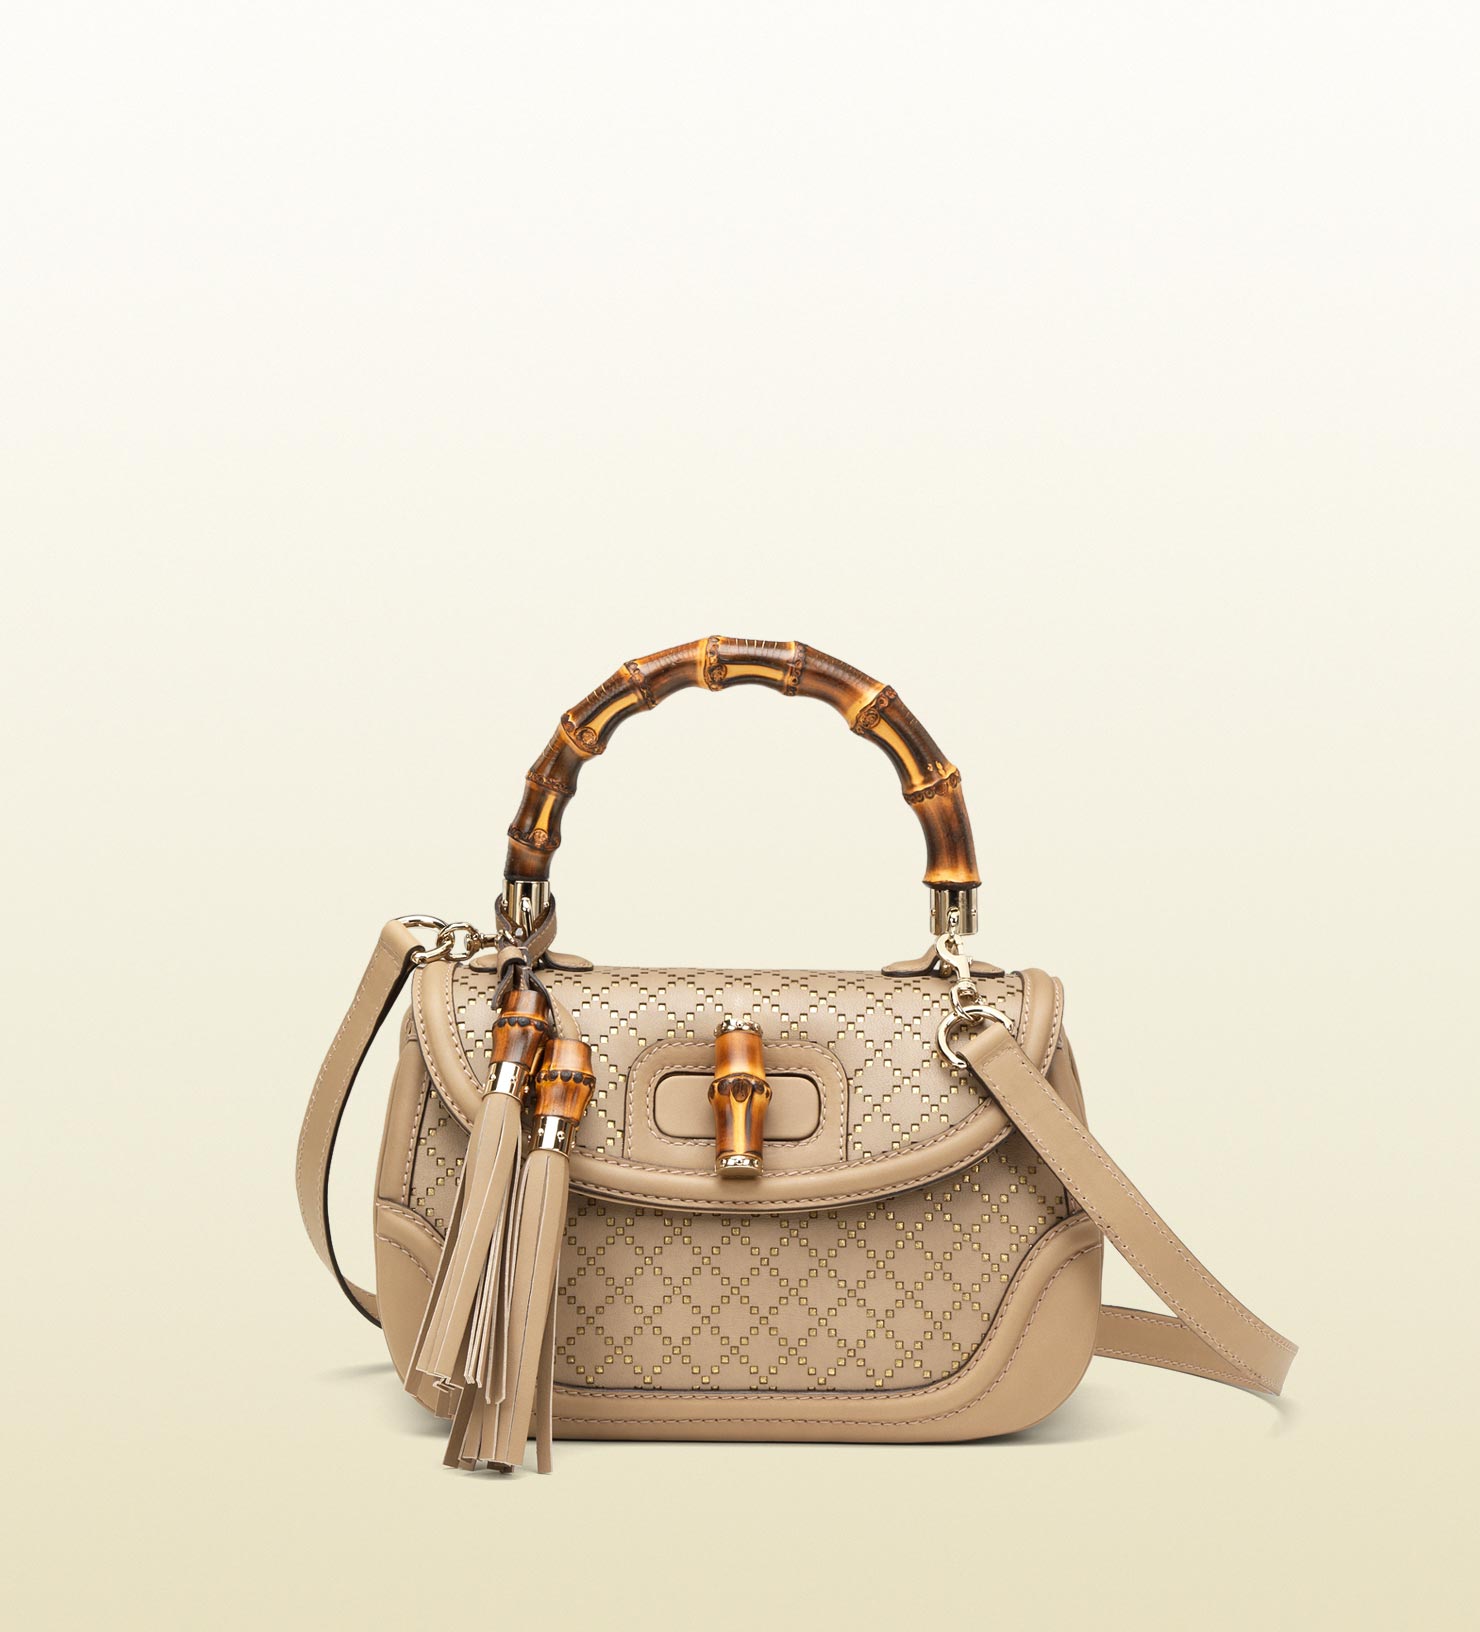 Gucci New Bamboo Bi-color Diamante Leather Top Handle Bag in Natural - Lyst